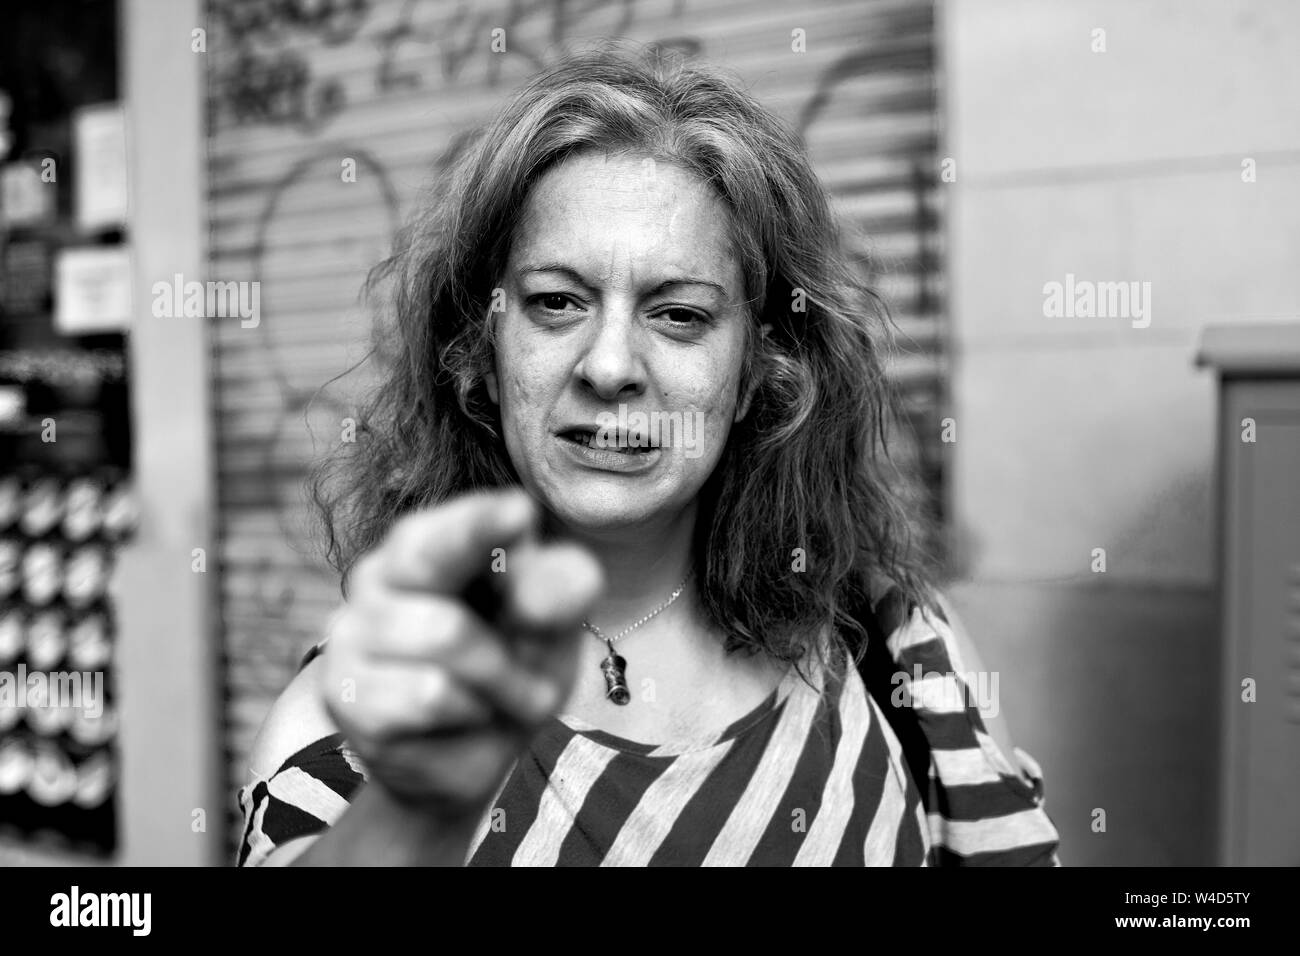 Angry alcoholic woman in the street, Barcelona, Spain. Stock Photo